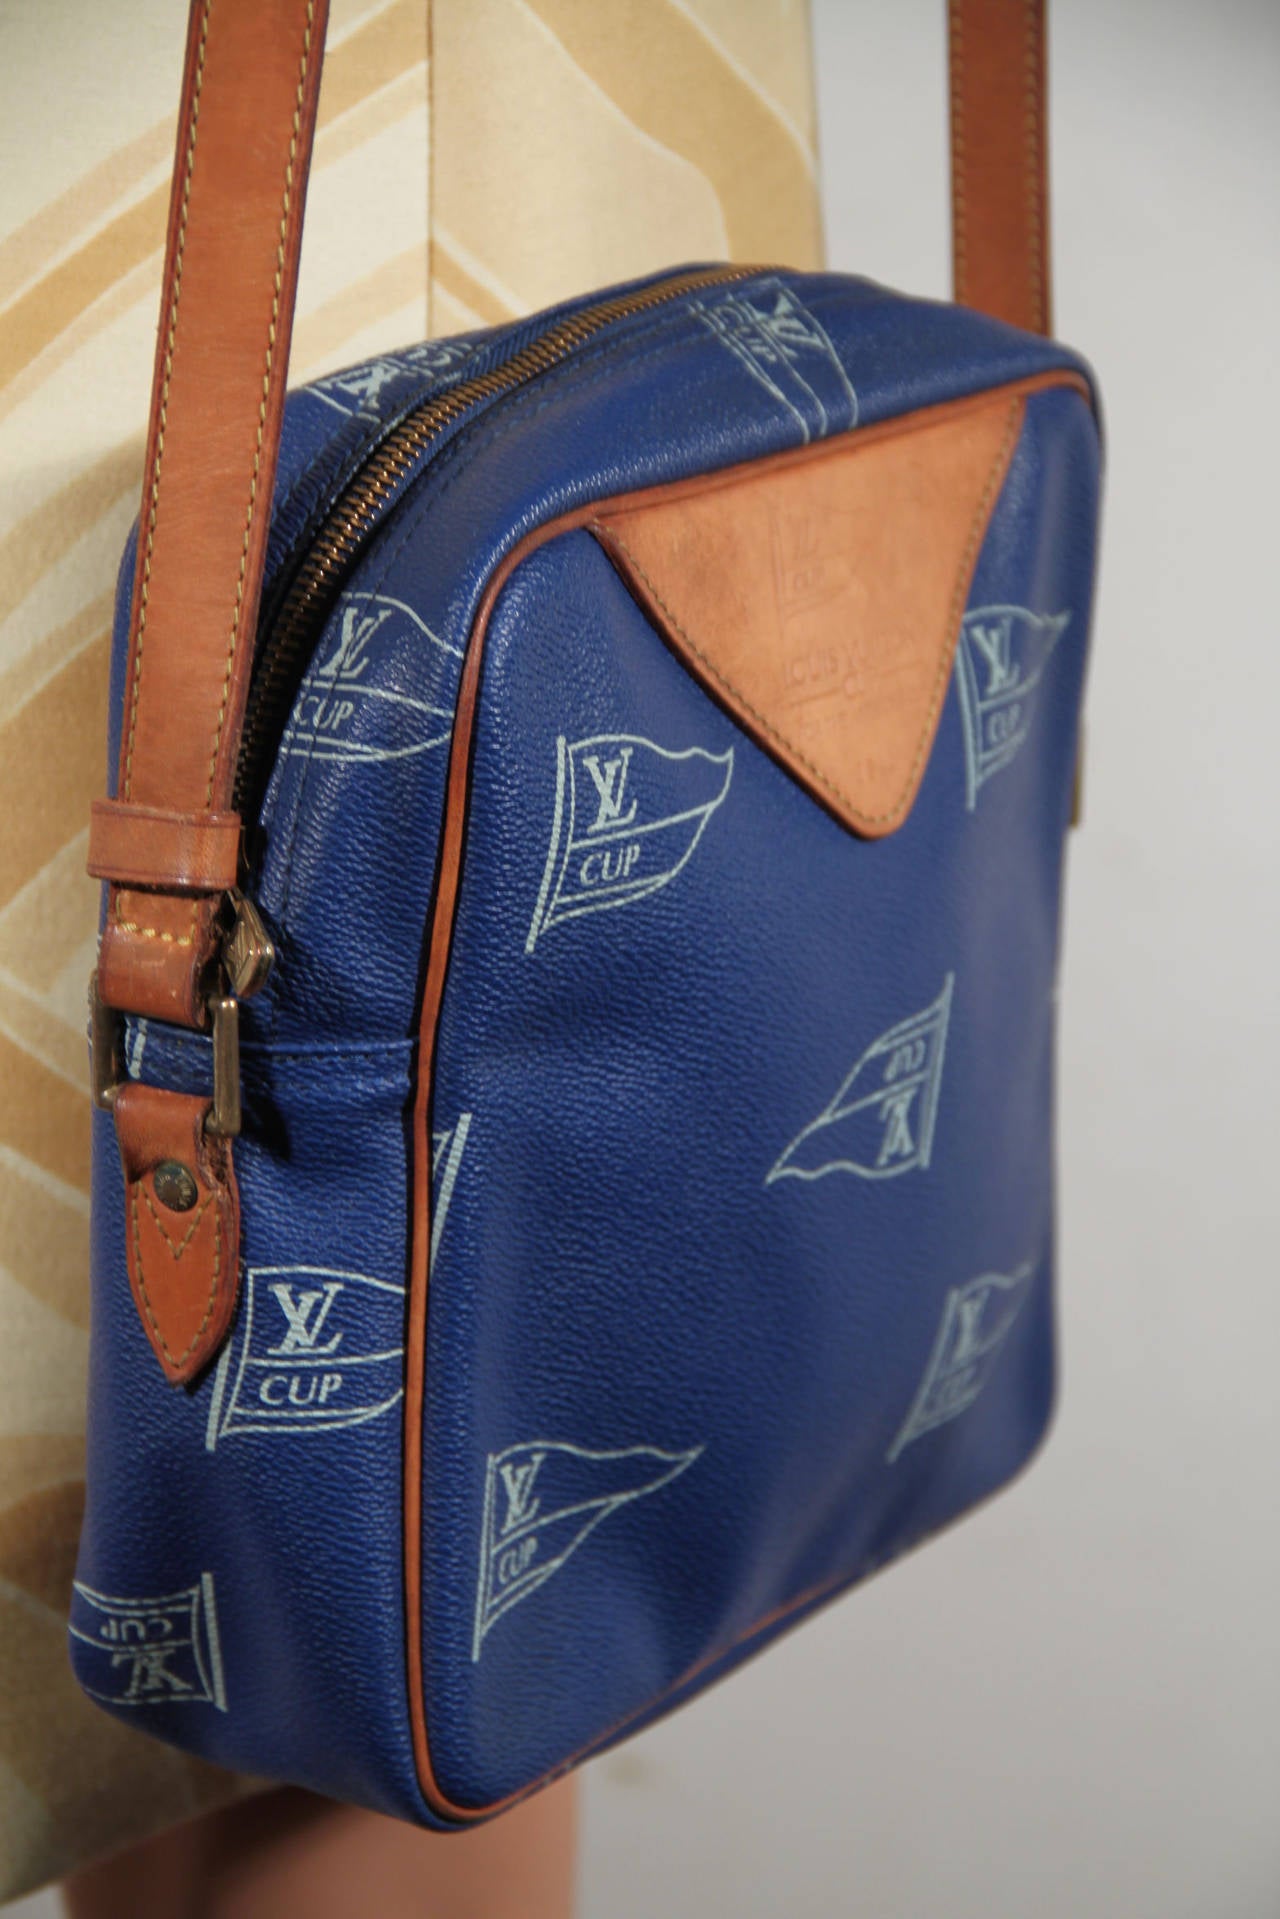 LOUIS VUITTON AMERICA CUP 1992 Blue Canvas MESSENGER BAG Limited Edition at 1stdibs